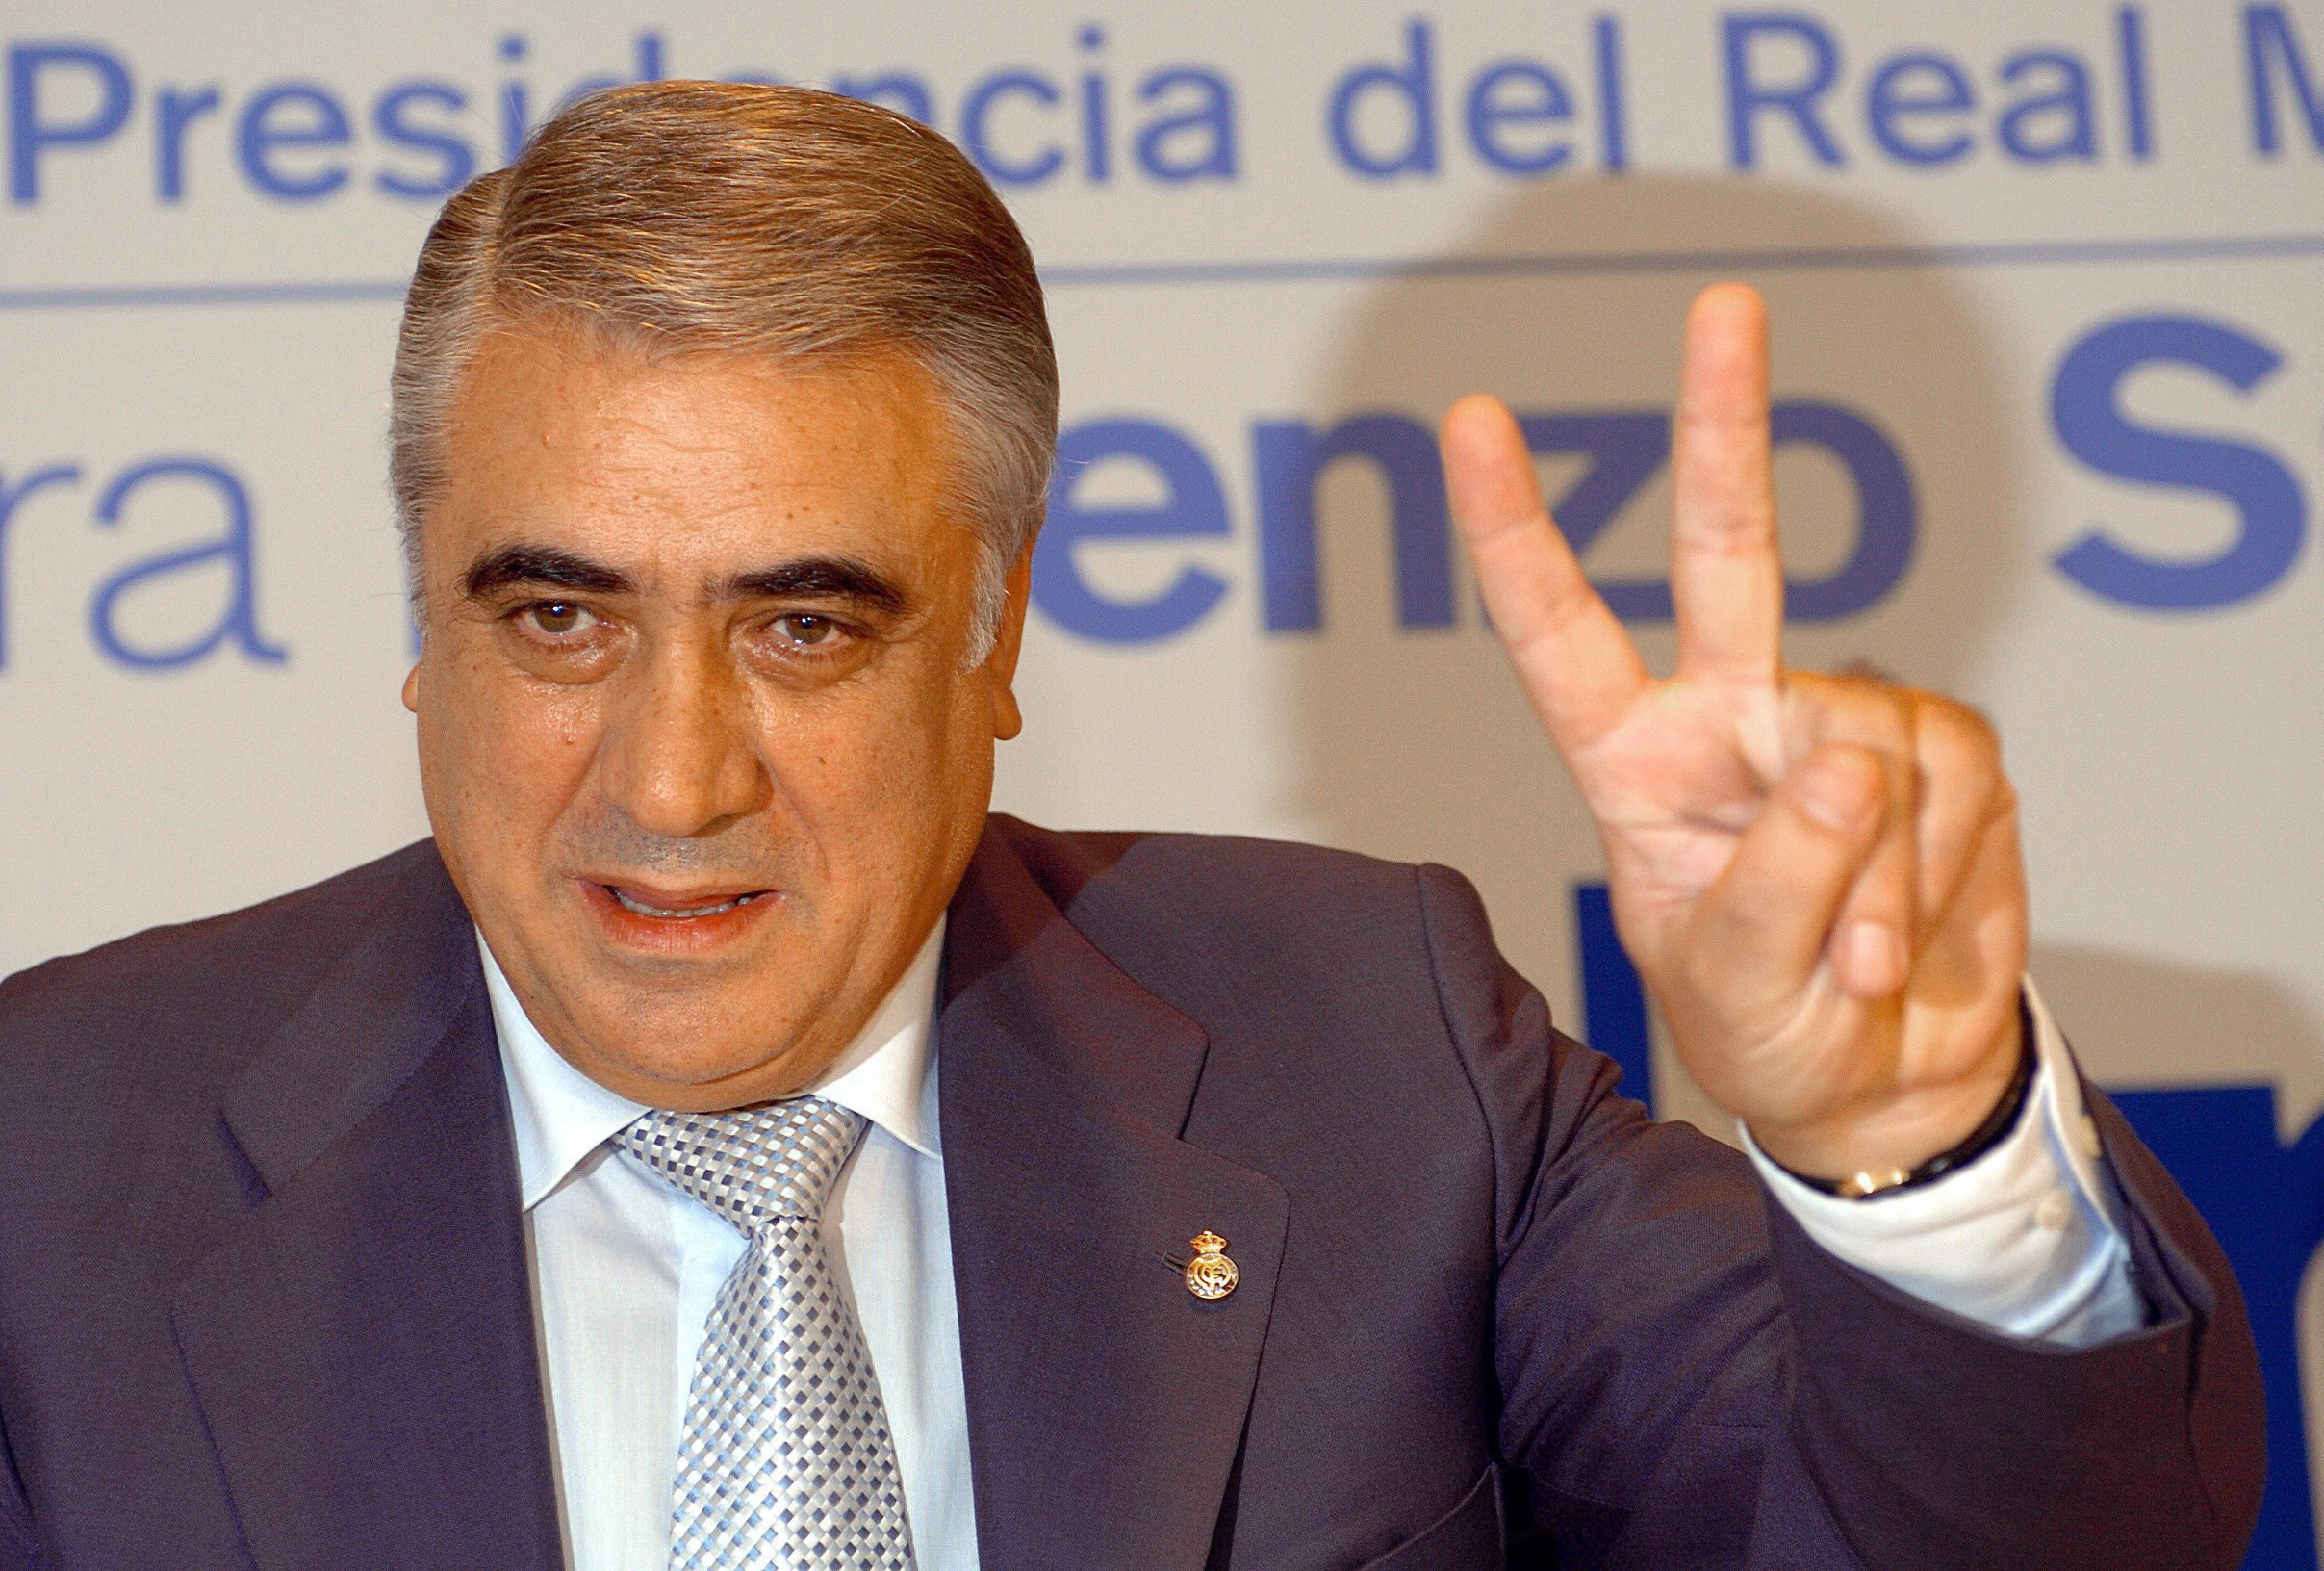 epa08312496 (FILE) Former Real Madrid soccer club chairman Lorenzo Sanz gives the victory sing during his presentation as candidate in the elections for presidency of the club, in Madrid, Spain, 24 June 2004 (reissued 21 March 2020). According to reports, his son Fernando Sanz reported on twitter that Lorenzo Sanz has died on 21 March 2020. Sanz, 76,  was infected with the Coronavirus and had COVID-19 disease.  EPA/SERGIO BARRENECHEA *** Local Caption *** 00219315